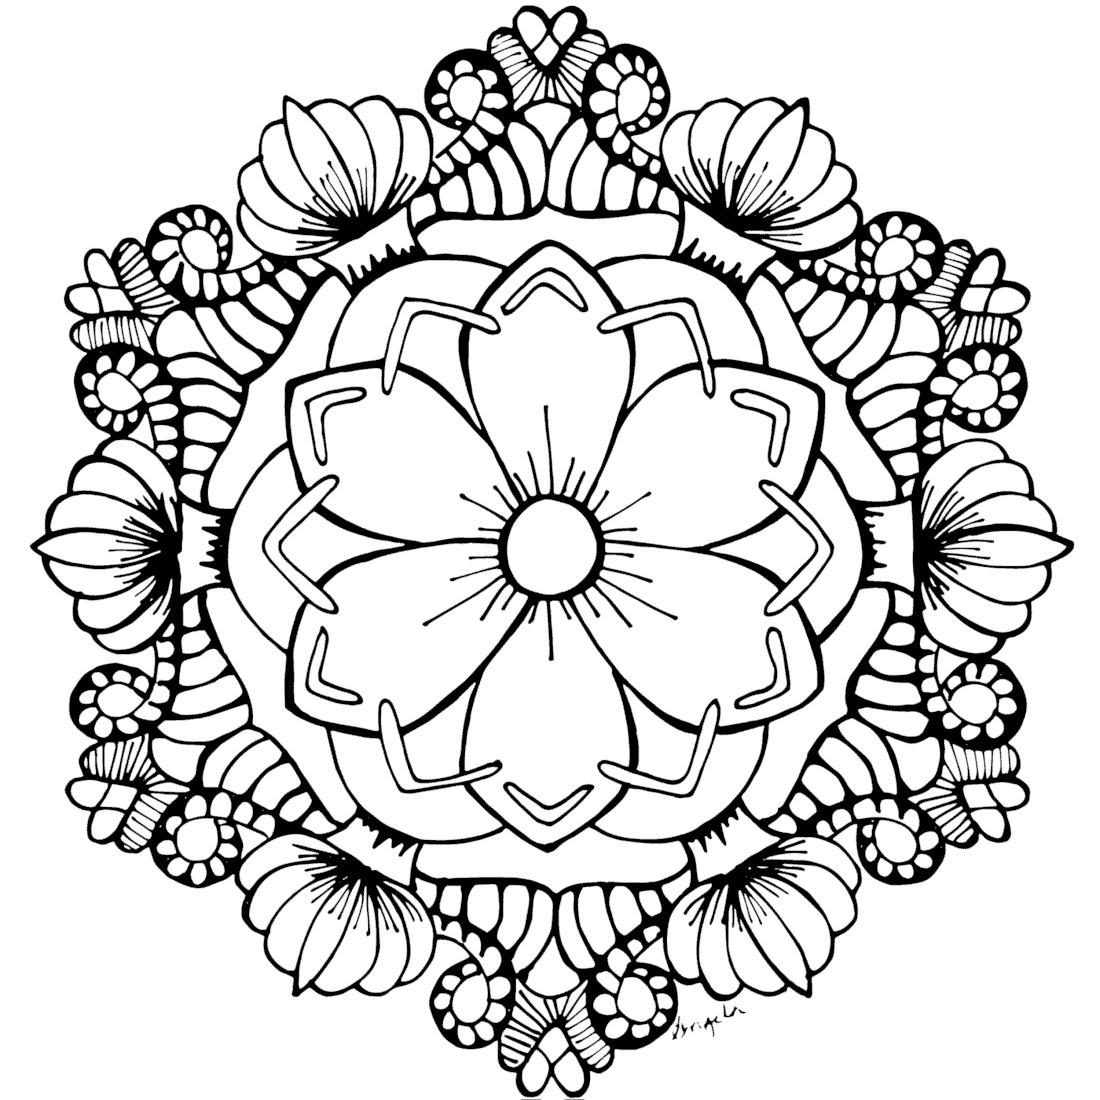 Free Coloring Pages For You To Print - Monday Mandala with Free Printable Mandala Coloring Pages